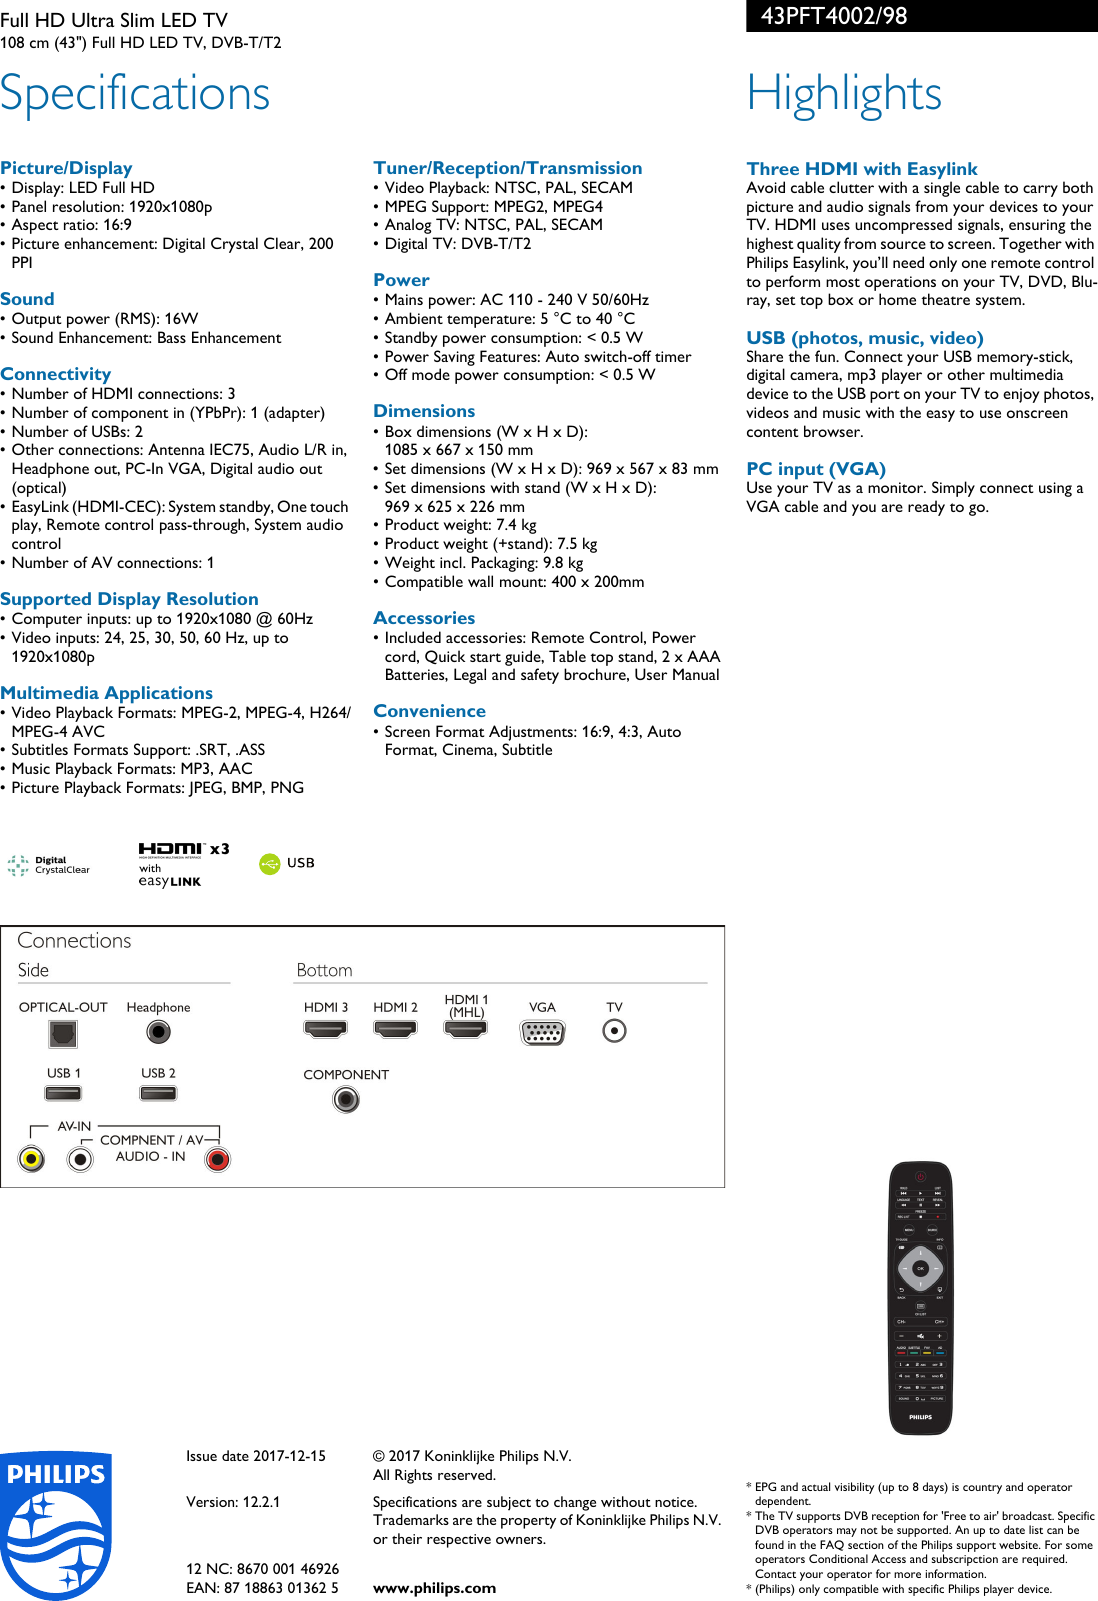 Page 2 of 2 - Philips 43PFT4002/98 Full HD Ultra Slim LED TV With Digital Crystal Clear User Manual Leaflet 43pft4002 98 Pss Engsg